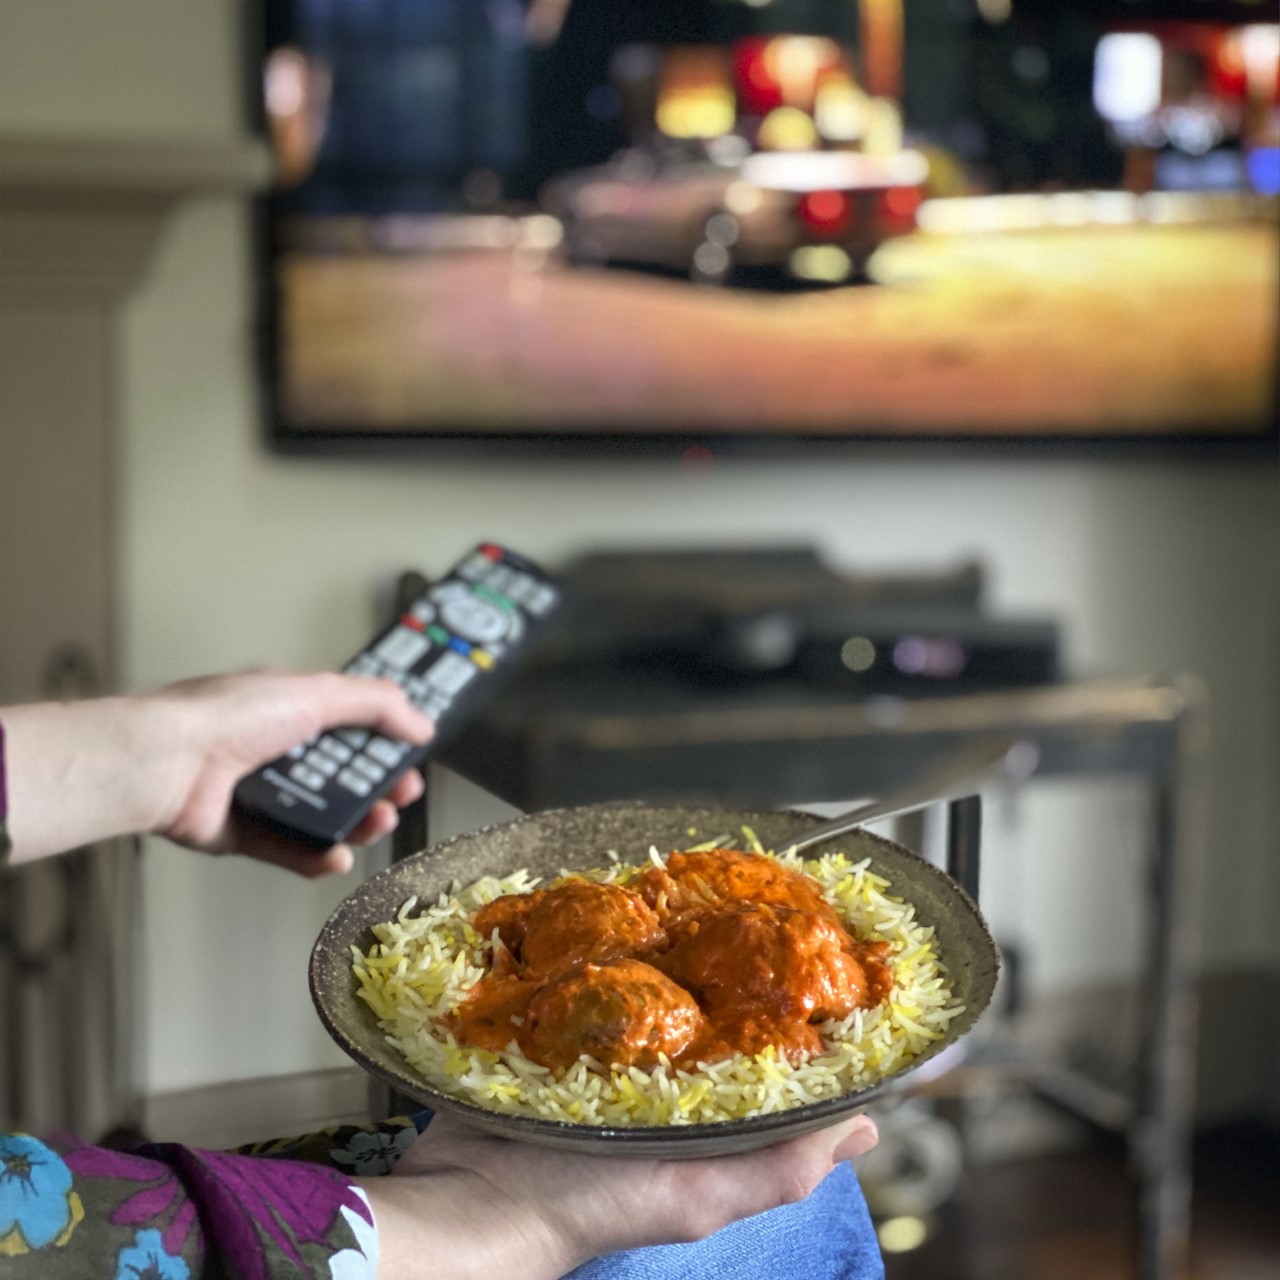 someone holding a plate with an Indian meal on it in one hand and a TV remote in the other hand, pointing it at a TV on a wall